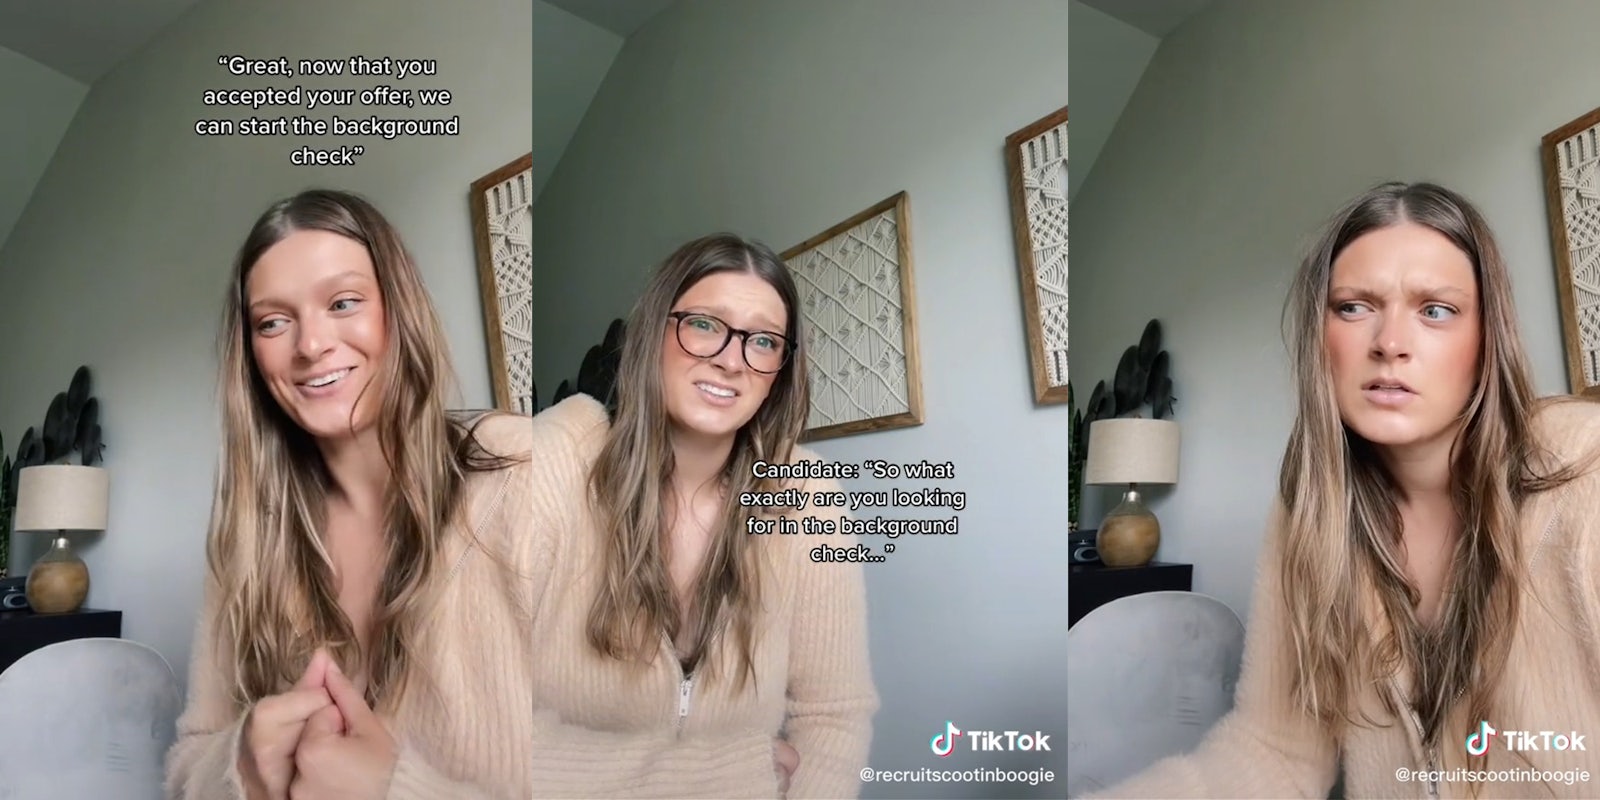 young woman with caption 'Great, now that you accepted your offer, we can start the background check' (l) young woman with glasses and caption 'Candidate: So what exactly are you looking for in the background check...' (c) young woman with perplexed look (r)